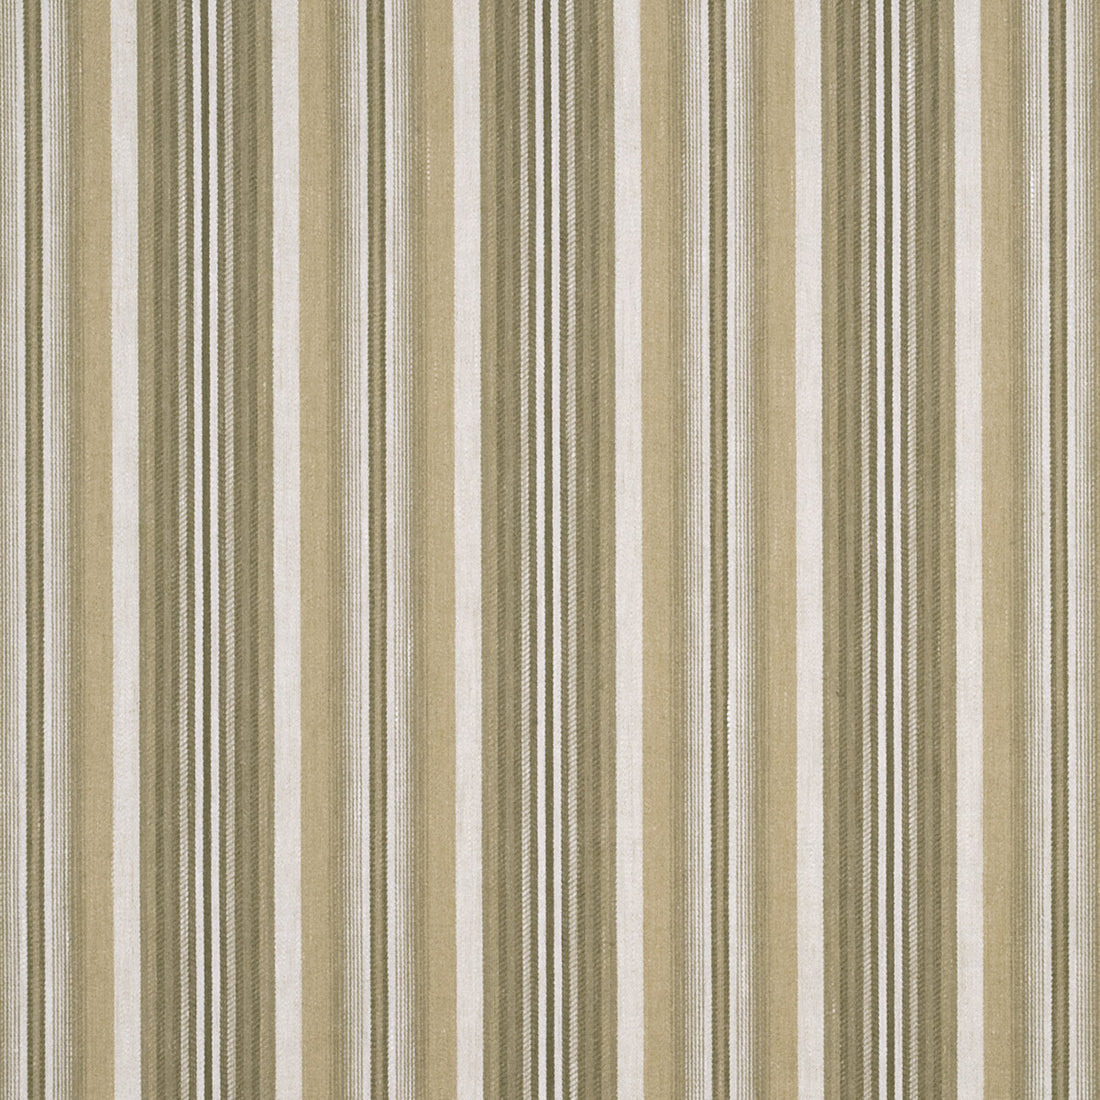 Melora Stripe fabric in linen/taupe color - pattern J0503.110.0 - by G P &amp; J Baker in the Lismore Weaves collection